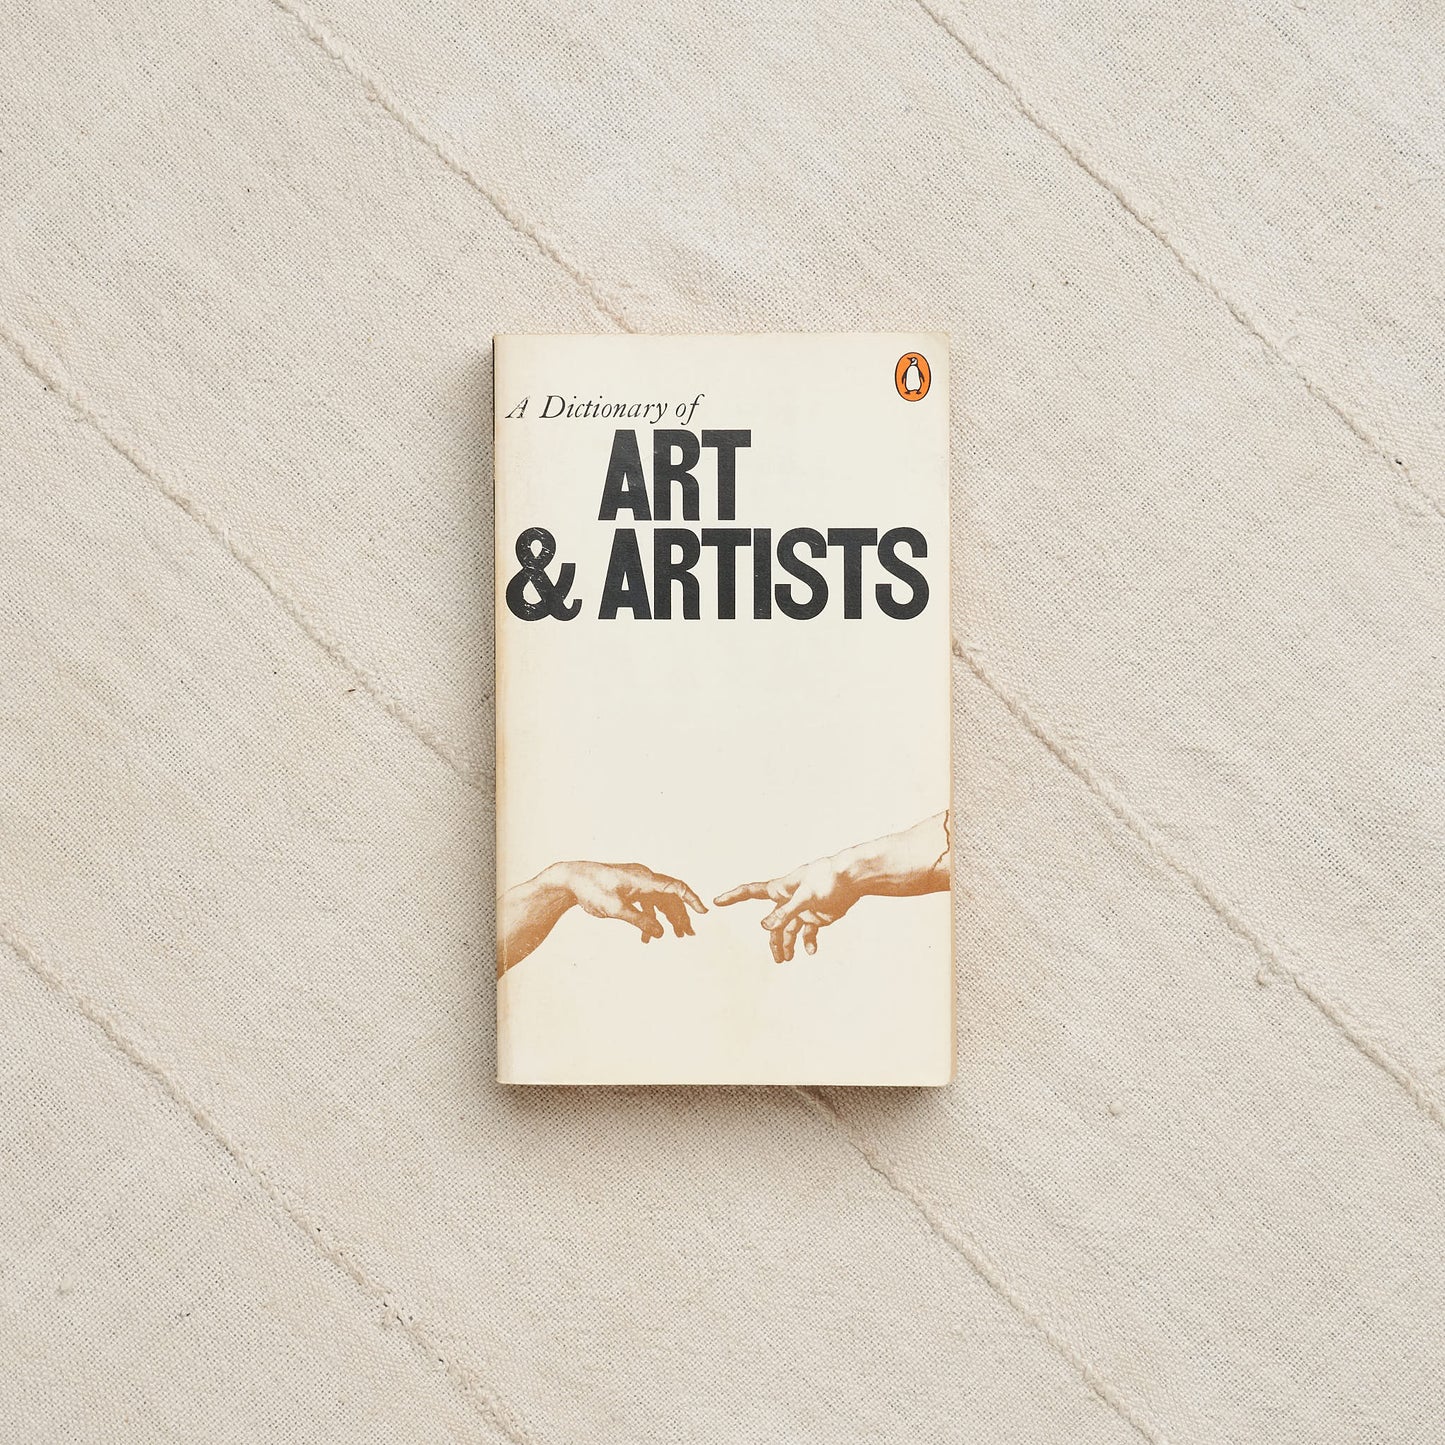 A Dictionary of Art & Artists